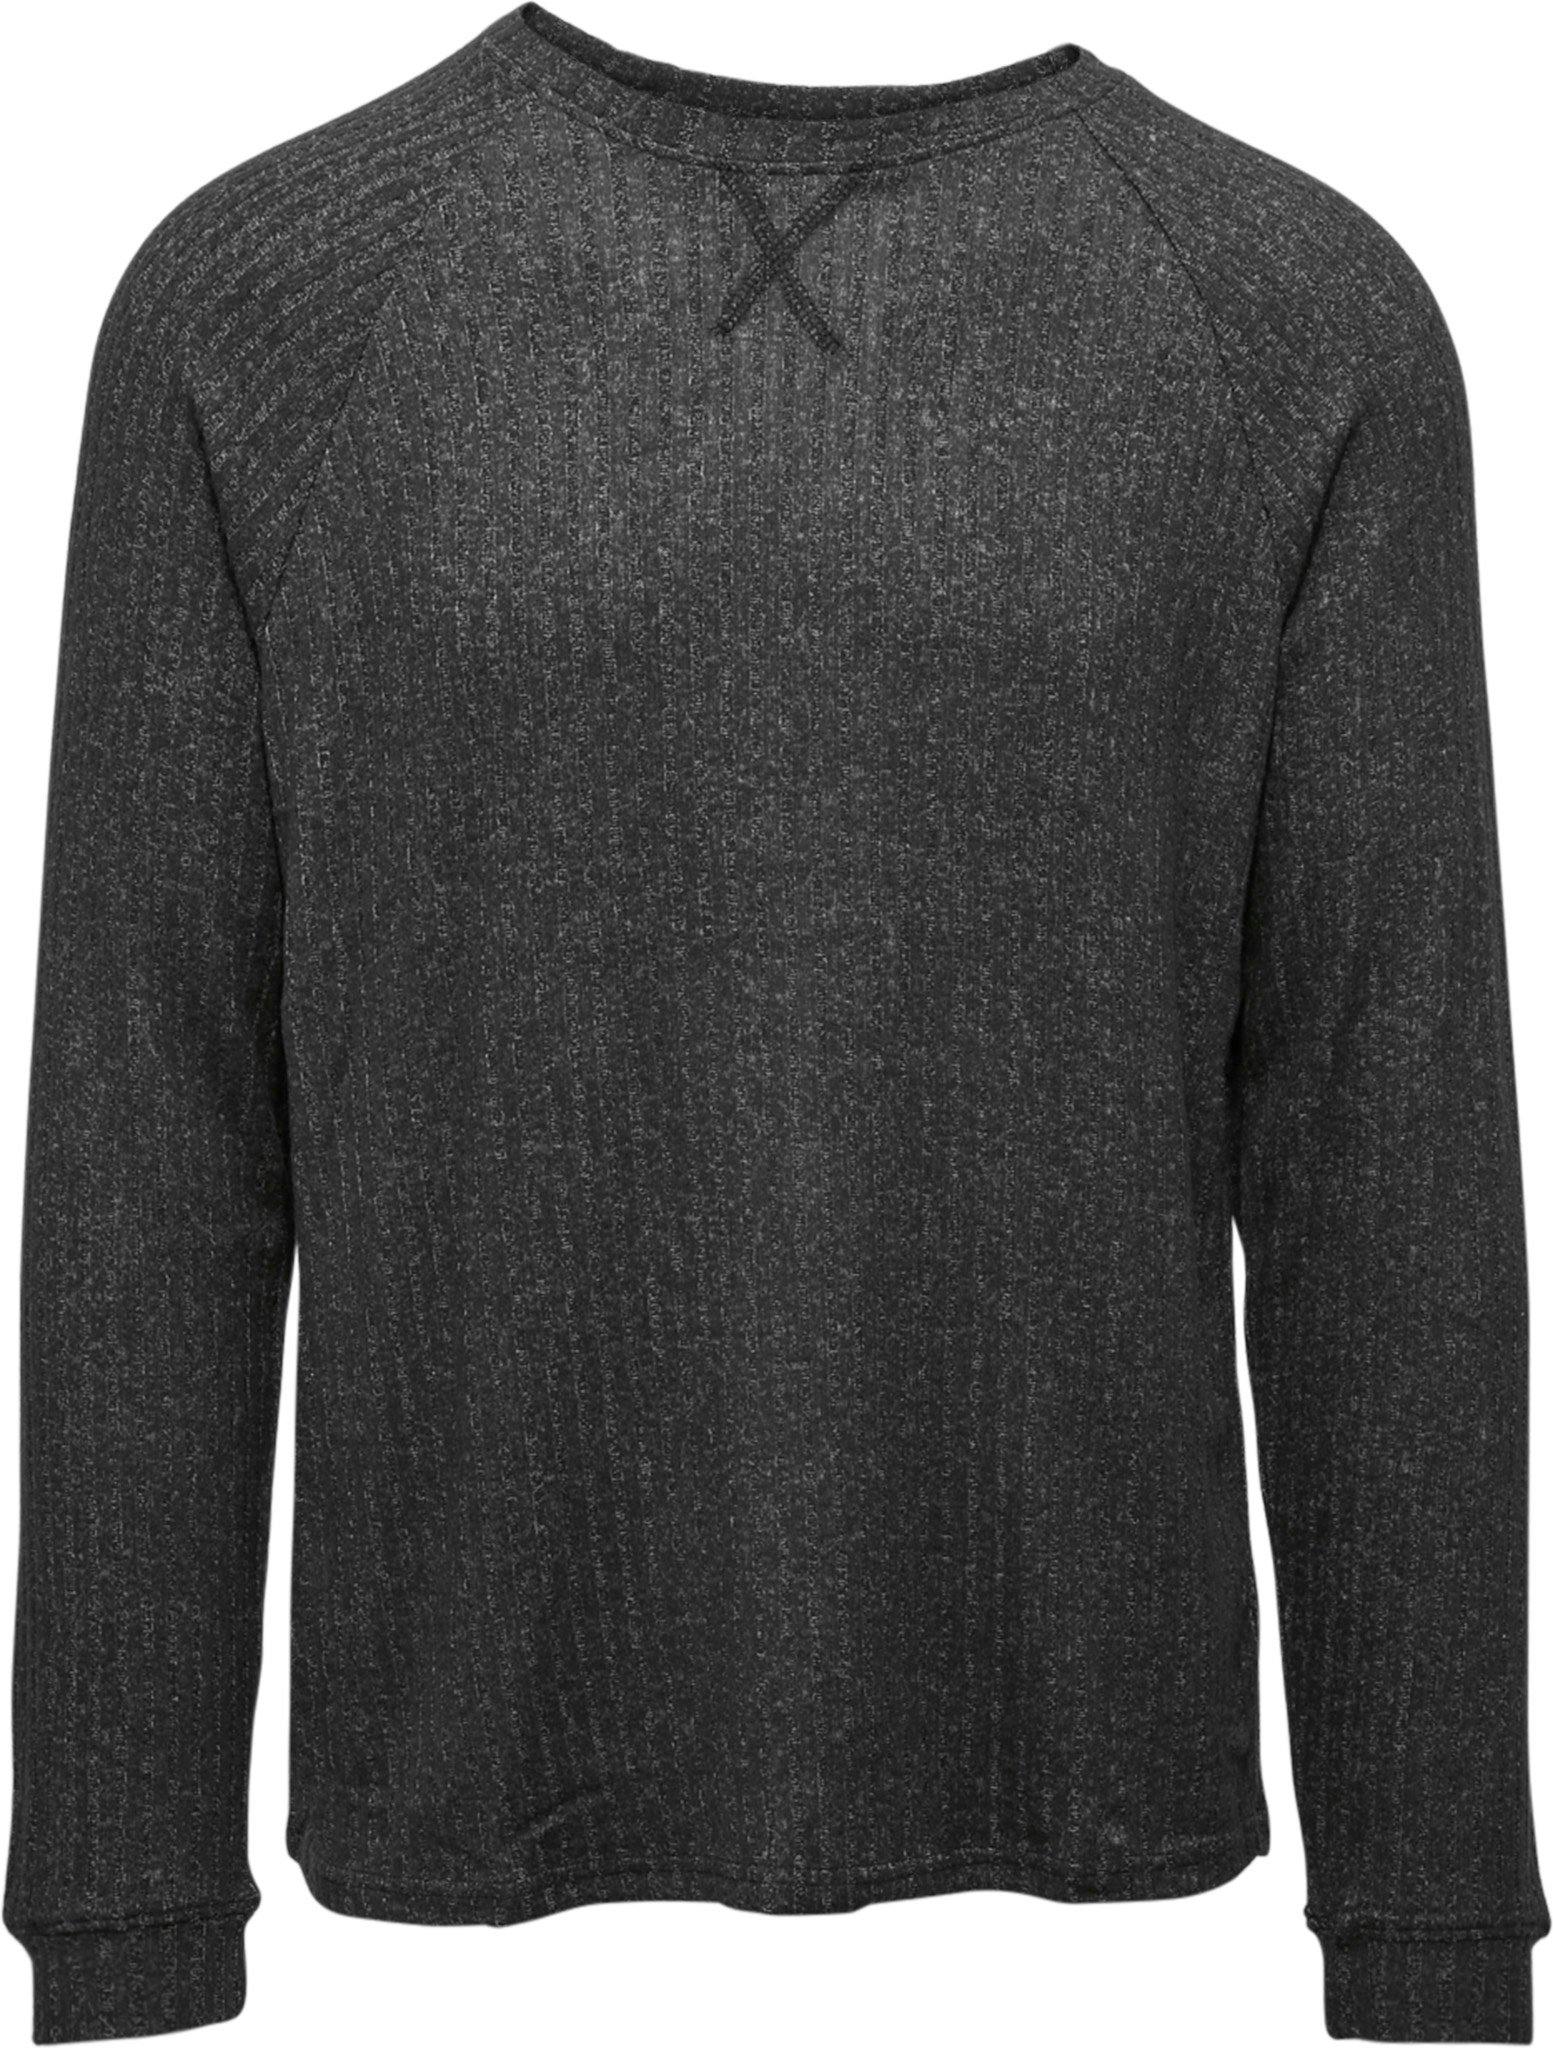 Product image for Leisure Crew Neck Sweater - Men's